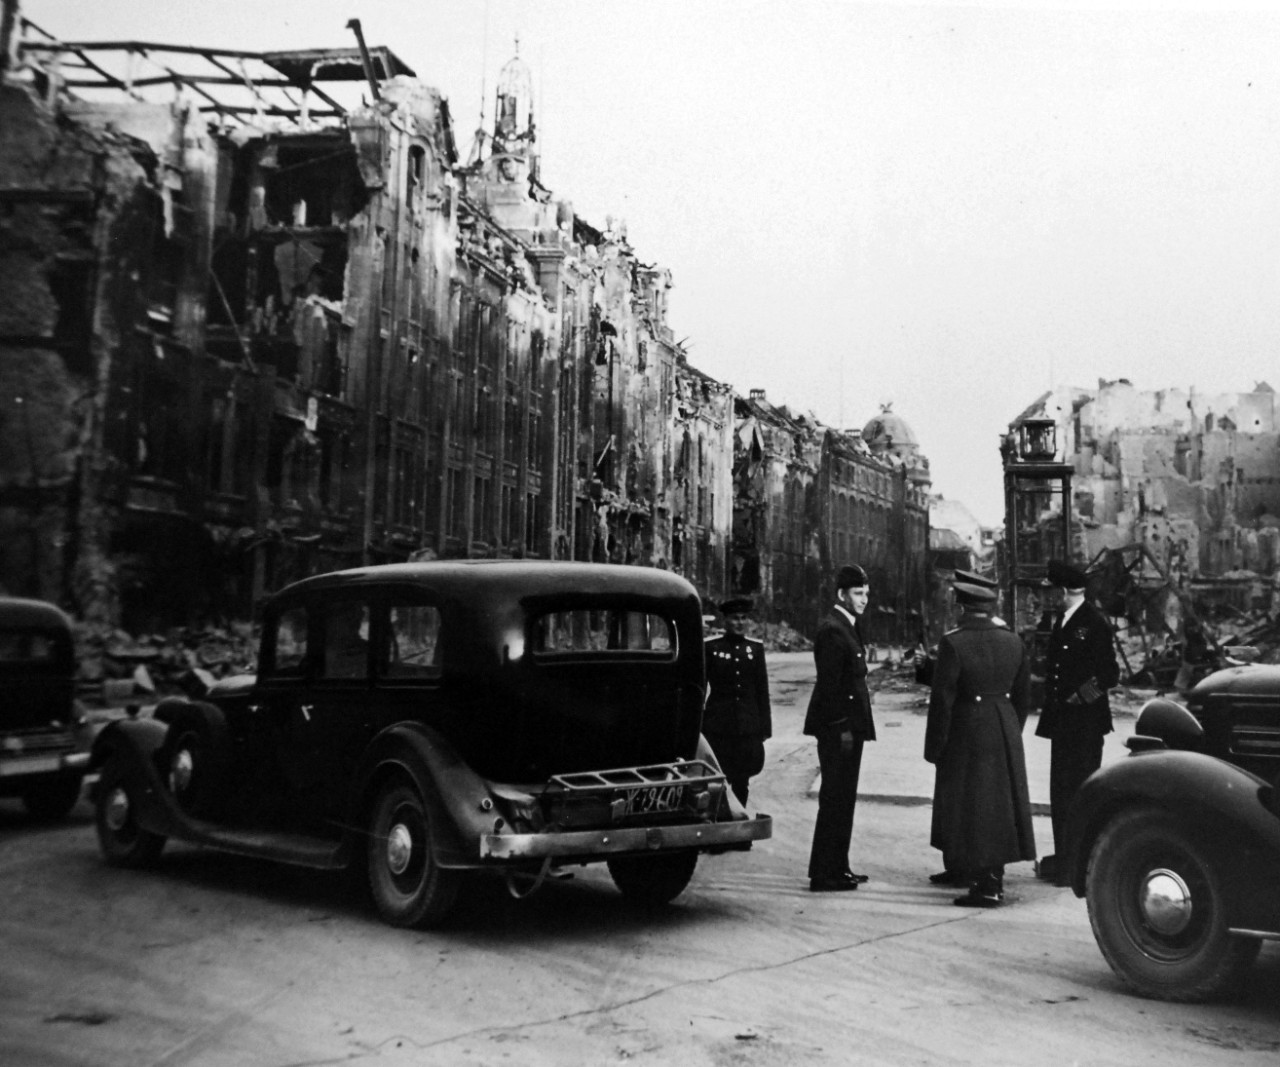 111-SC-27439:   Surrender of Germany, May 9, 1945.  Air Chief Marshall Sir Arthur Teddar, Deputy Supreme Commander and Admiral Sir Harold M. Burroughs, Allied Naval Commander in Chief, are shown around demolished Berlin, Germany, by their Russian hosts.  Supreme Headquarters Allied Expeditionary Force (SHAEF) Officials are there to sign the ratified surrender terms agreed upon at Reims.   Photographed by Lieutenant Moore.   U.S. Army photograph.  Courtesy of the Library of Congress Collection, Lot-8988. (2015/10/16).